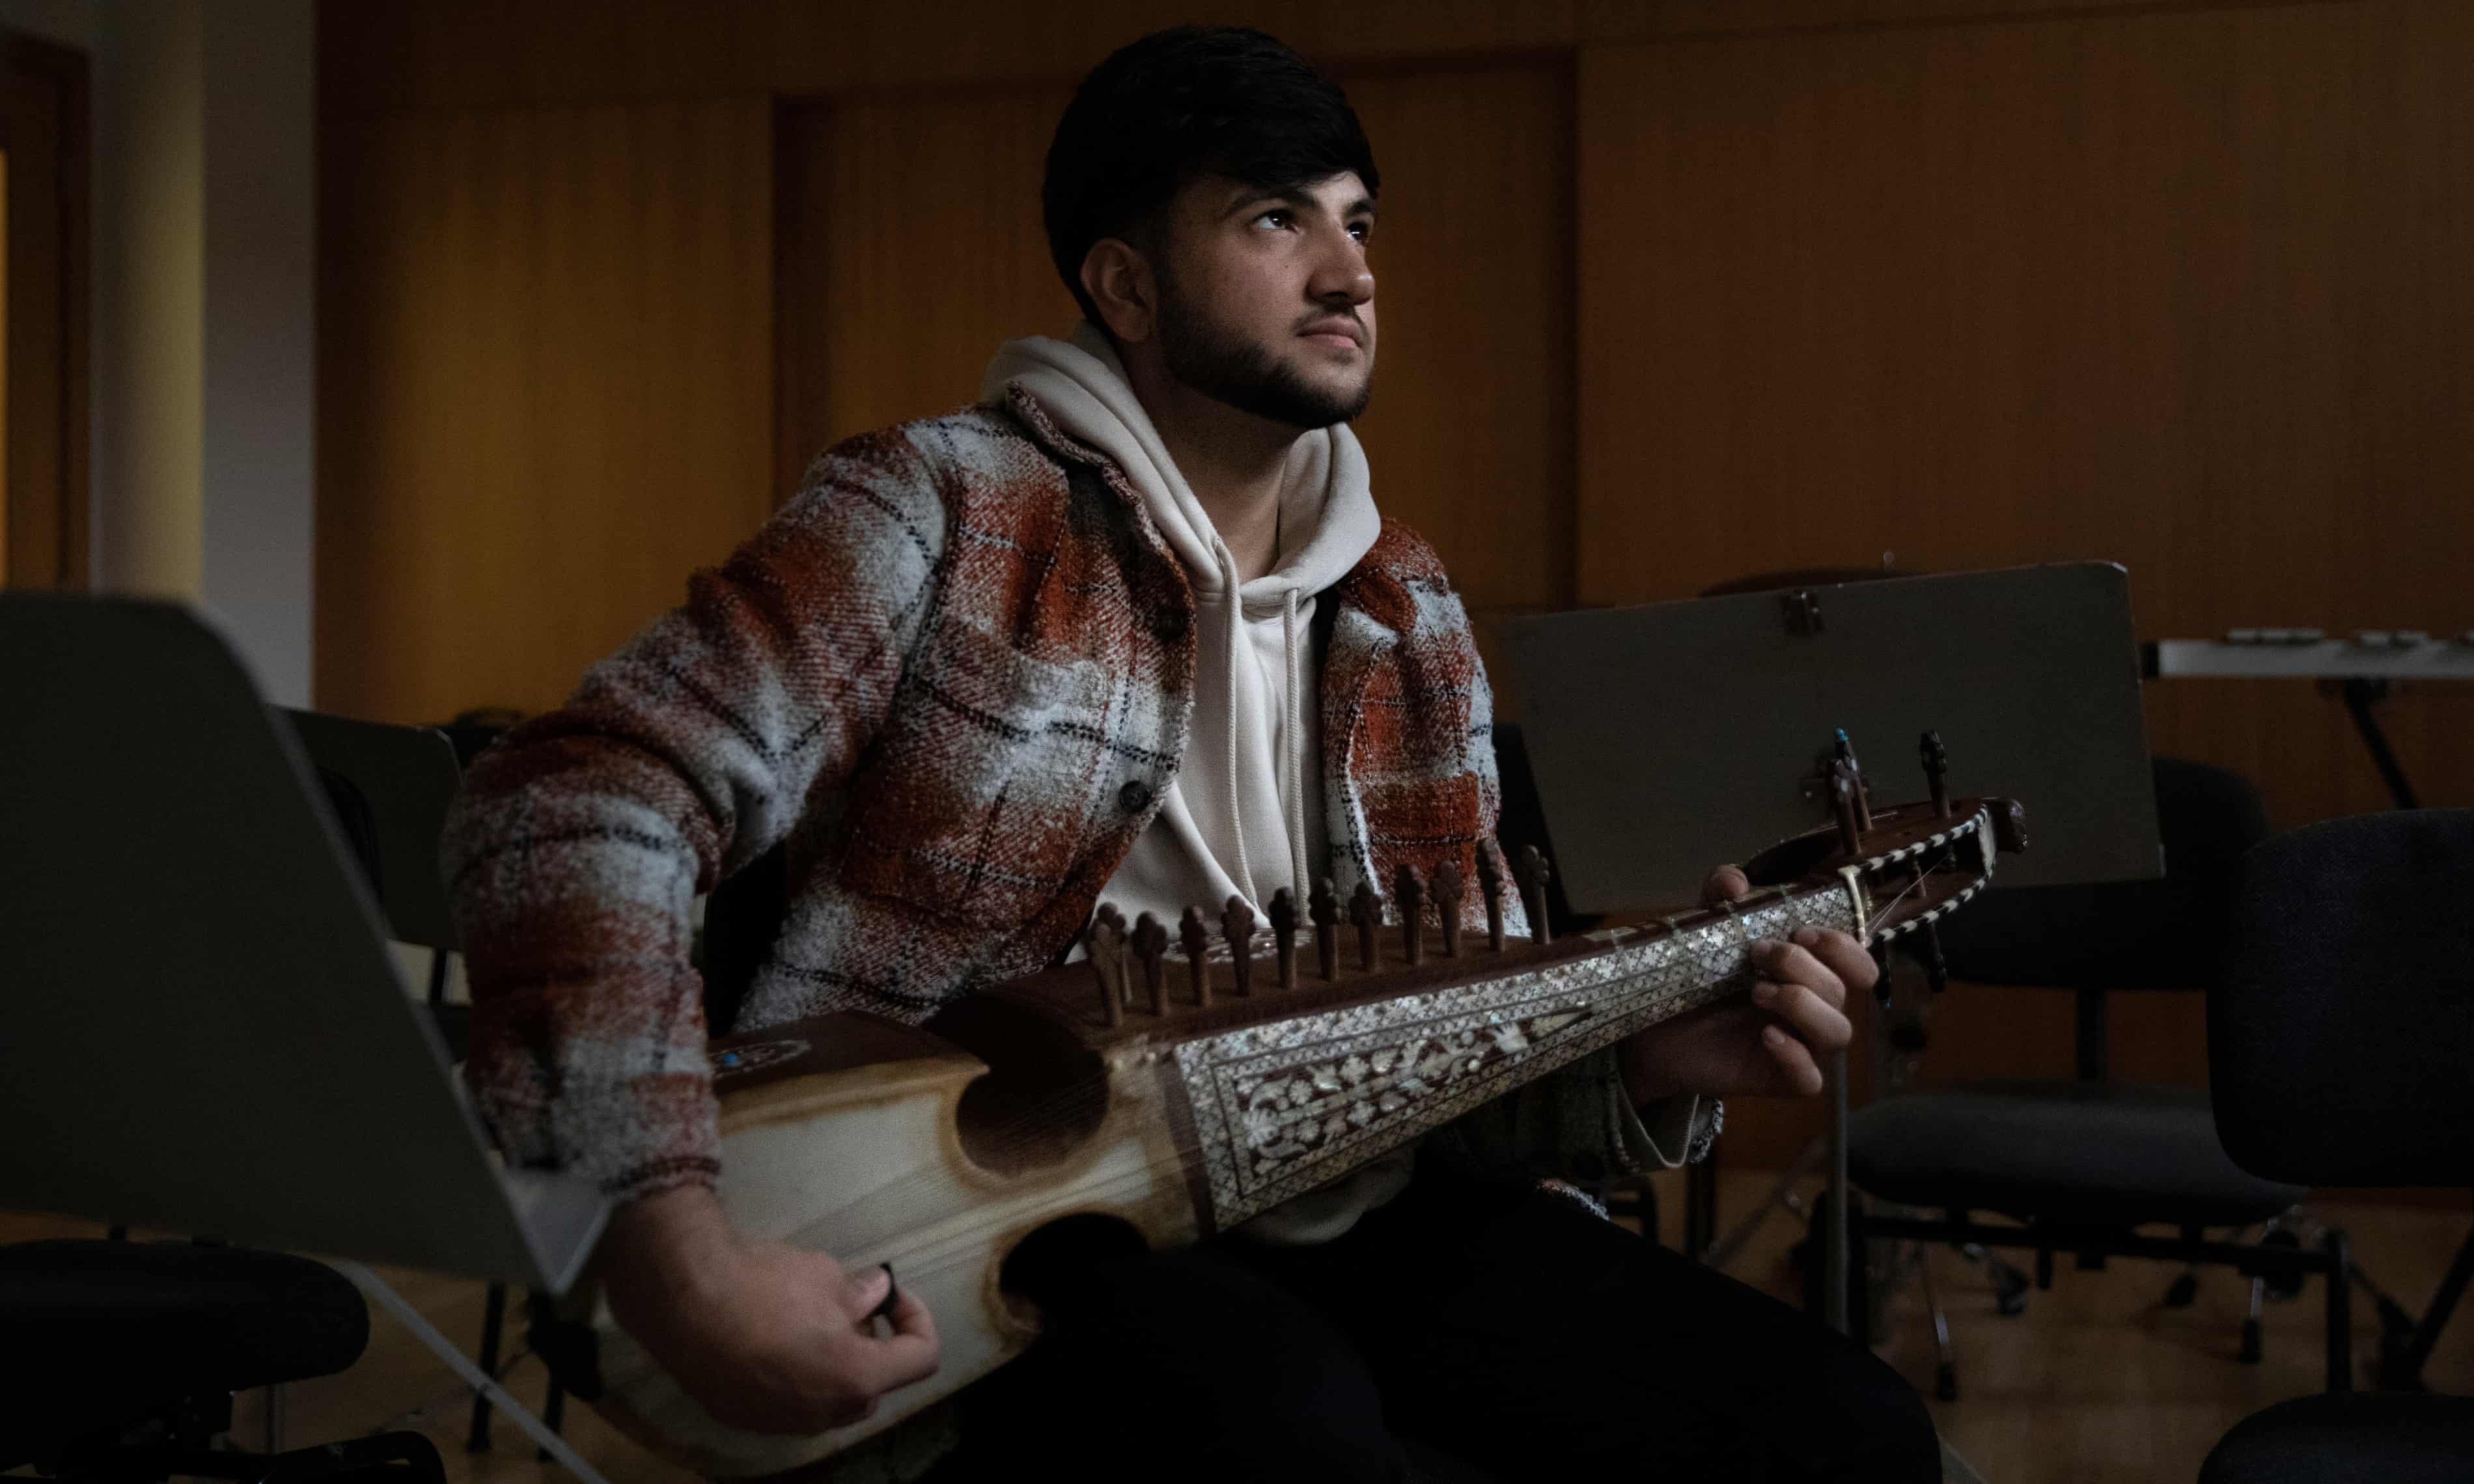 ‘The Taliban tried to silence us’: the musicians who escaped to Portugal (theguardian.com)